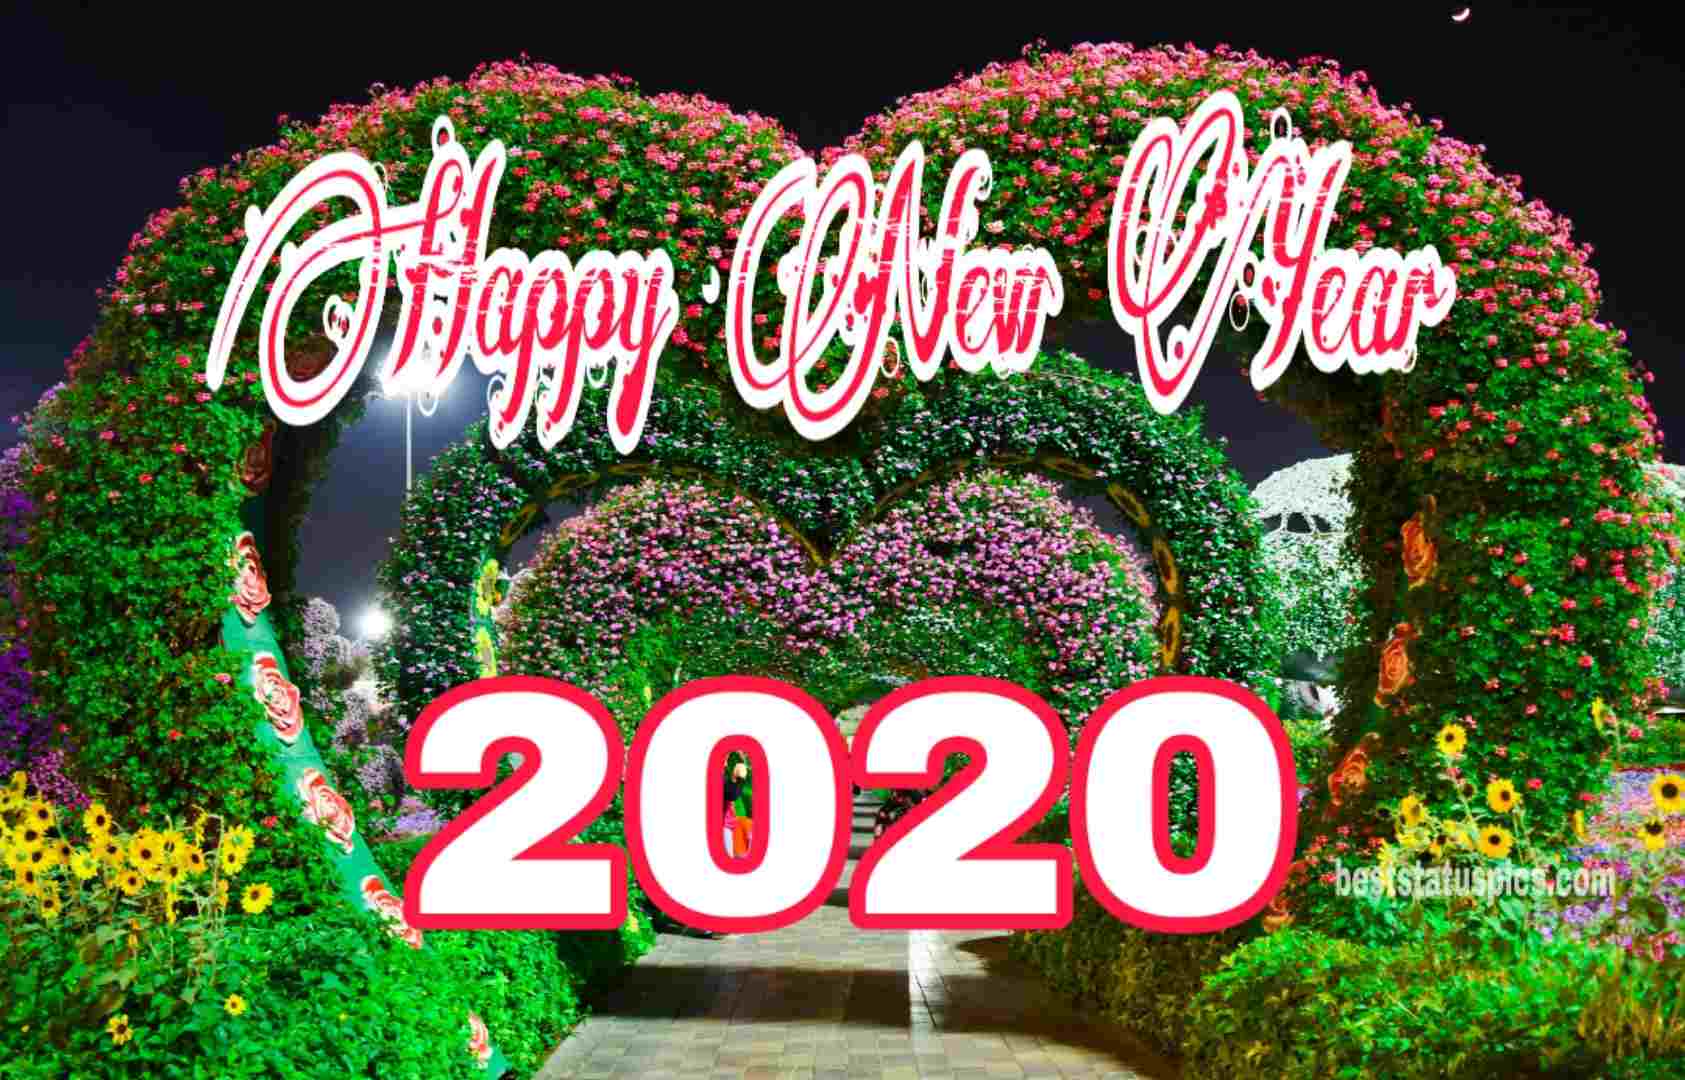 Happy New Year Wallpapers 2020 HD Images Free Download